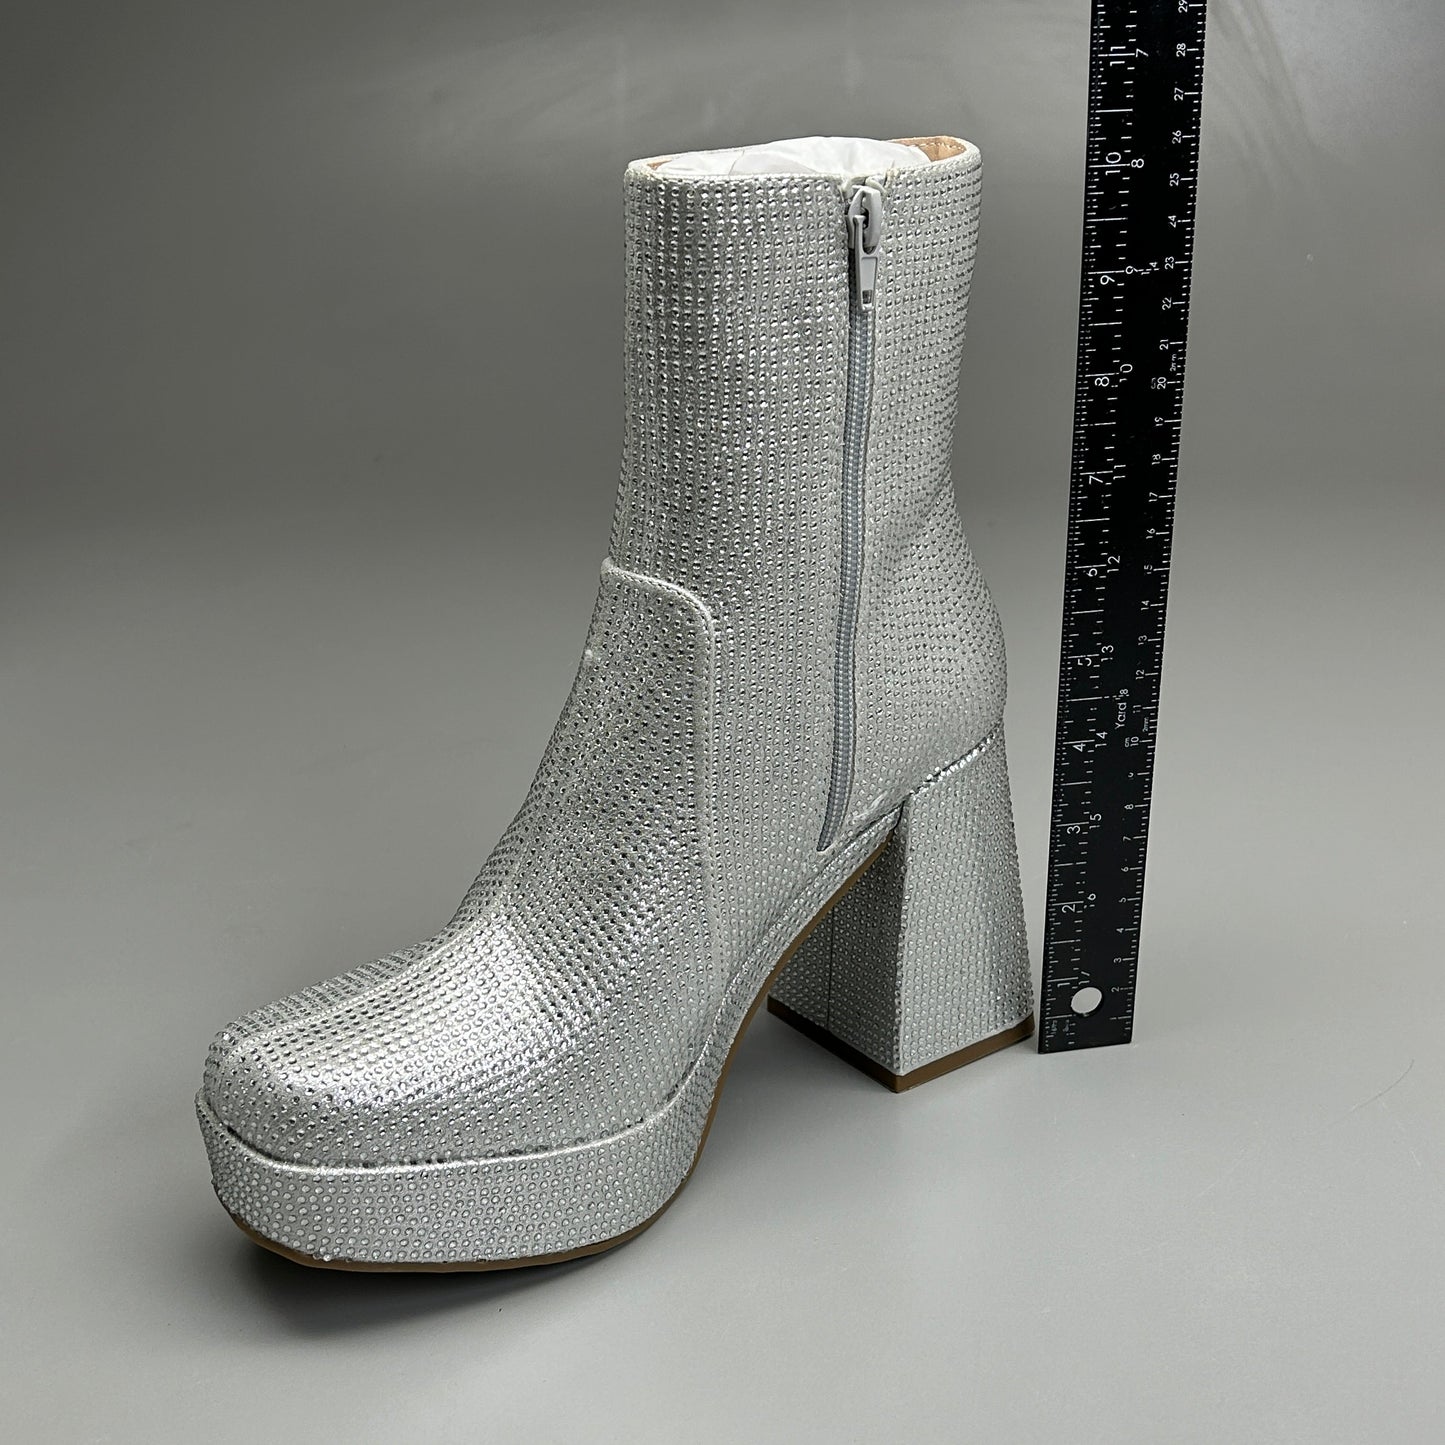 MIA Iva Silver Stone Heeled Boots Women's Sz 8 Silver GS1253108 (New)